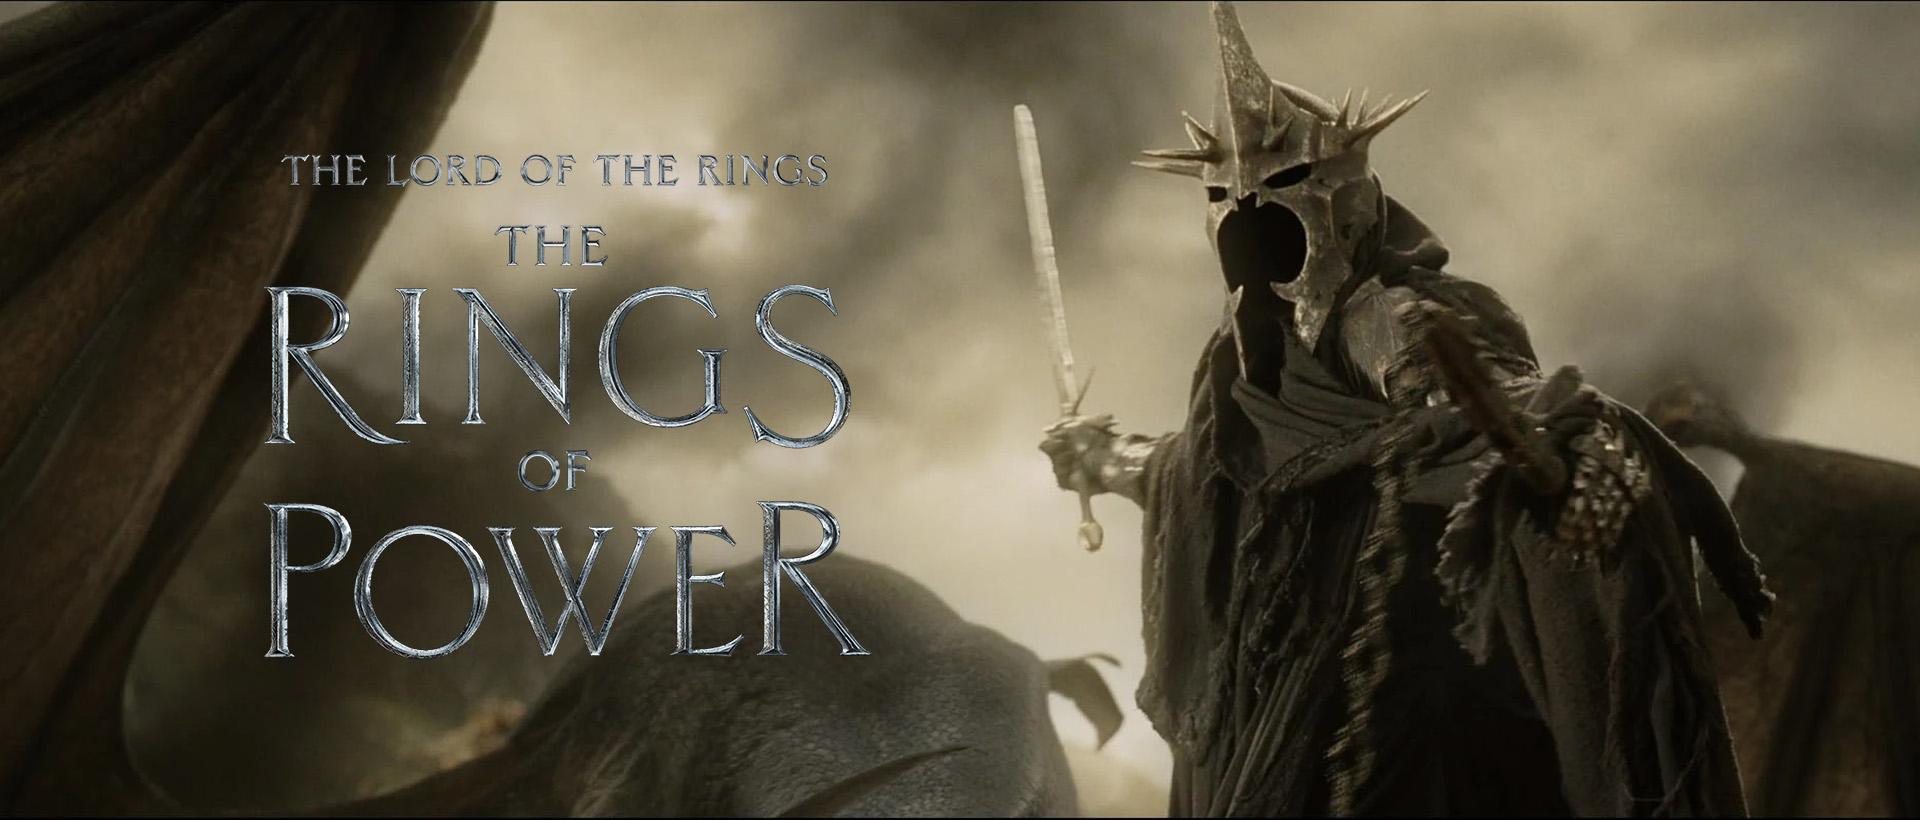 Rings Of Power Season 2 Moving Forward Without Showrunners